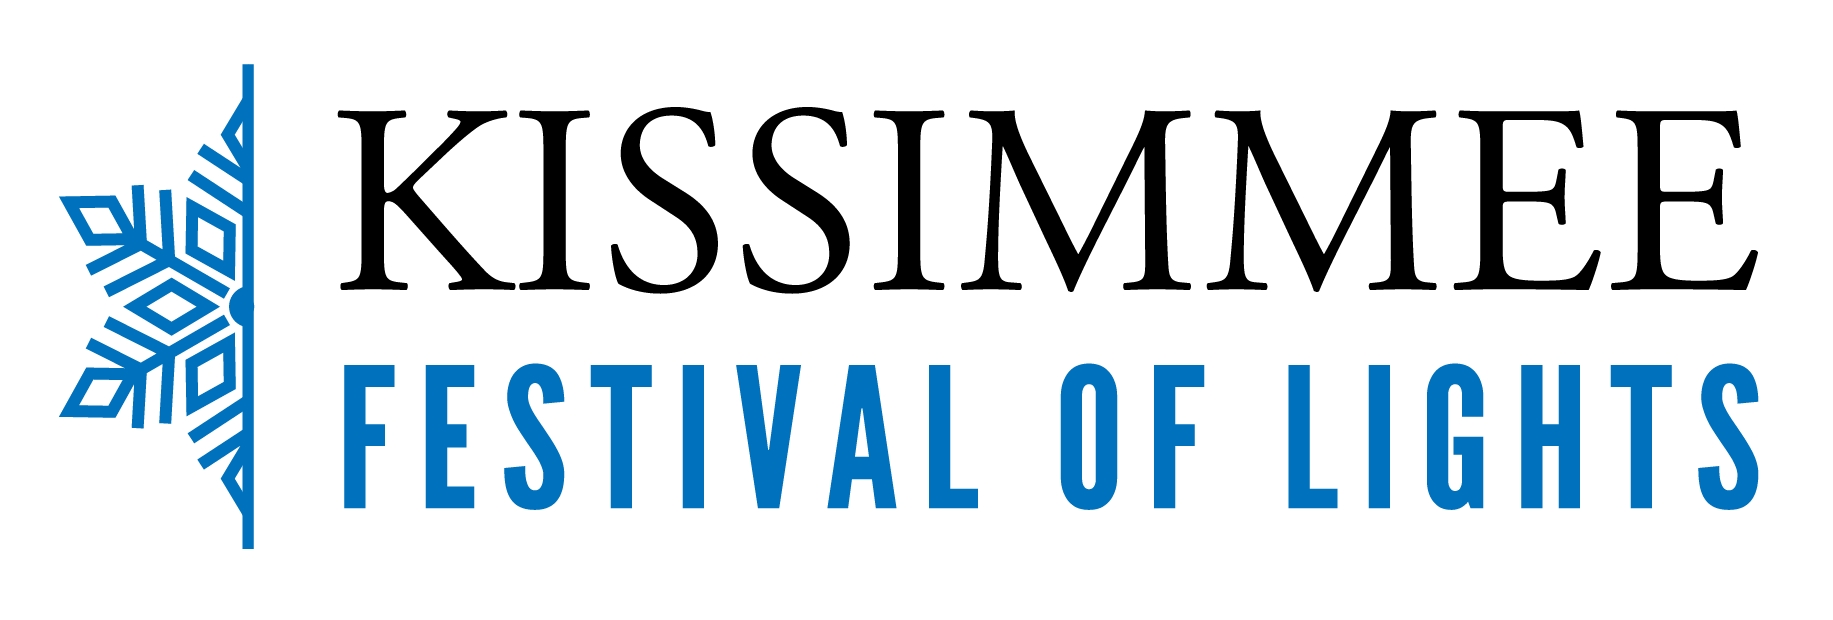 City of Kissimmee - Festival of Lights